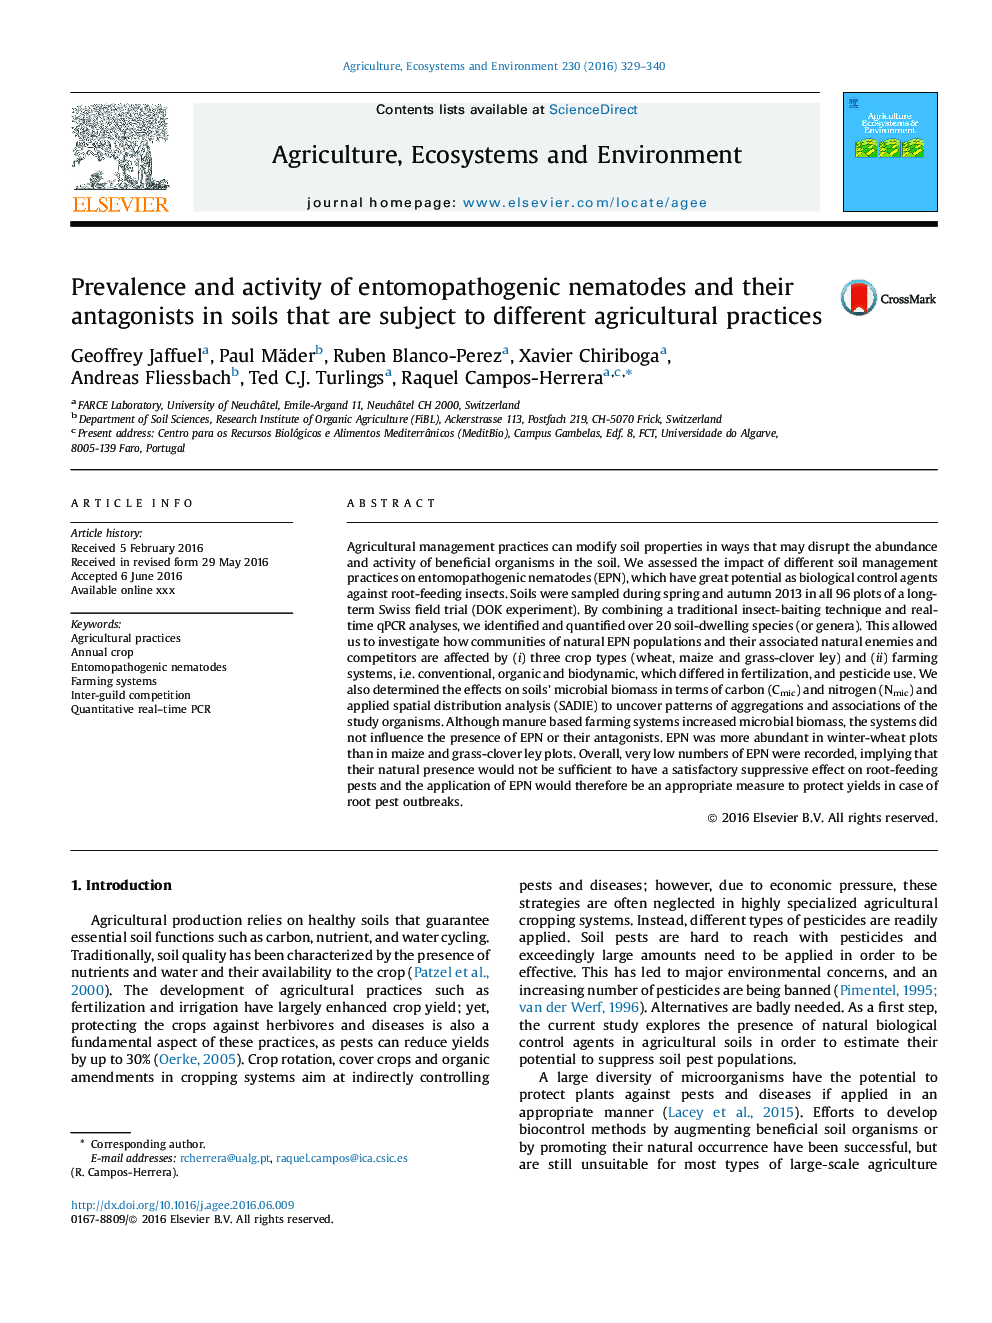 Prevalence and activity of entomopathogenic nematodes and their antagonists in soils that are subject to different agricultural practices